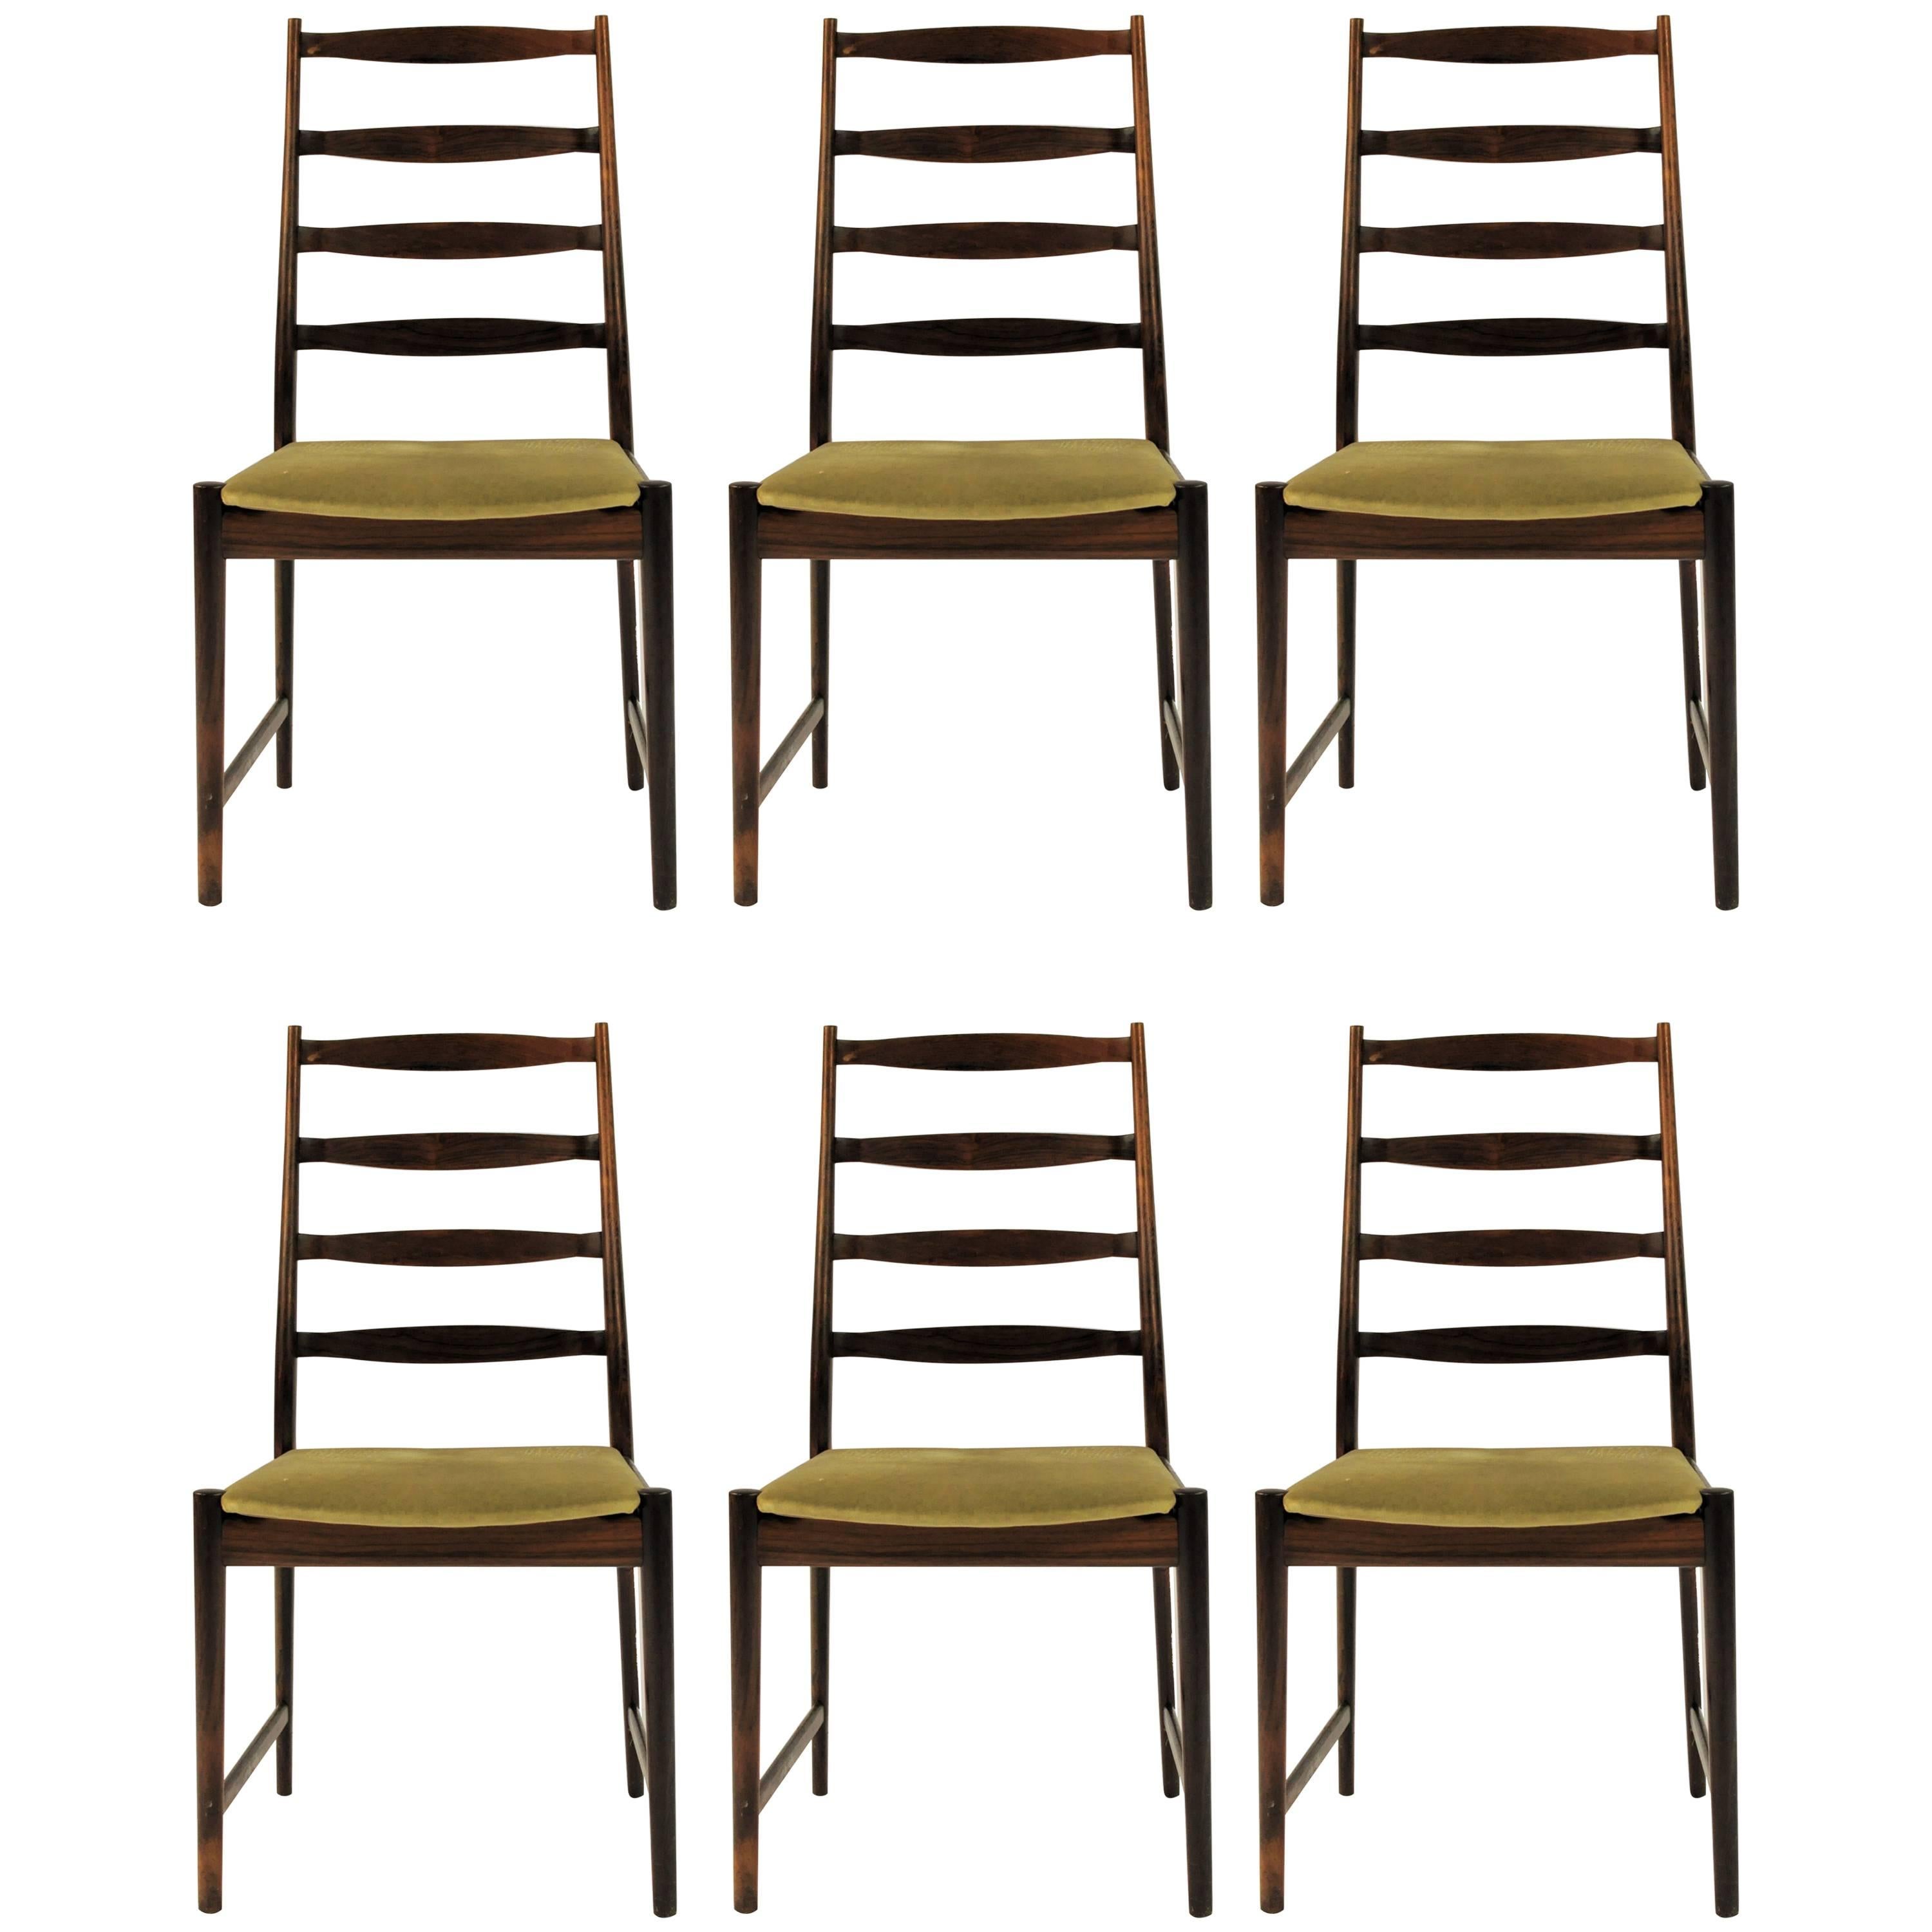 1960s Torbjorn Alfdal - Six Dining Chairs in Rosewood with choice of upholstery